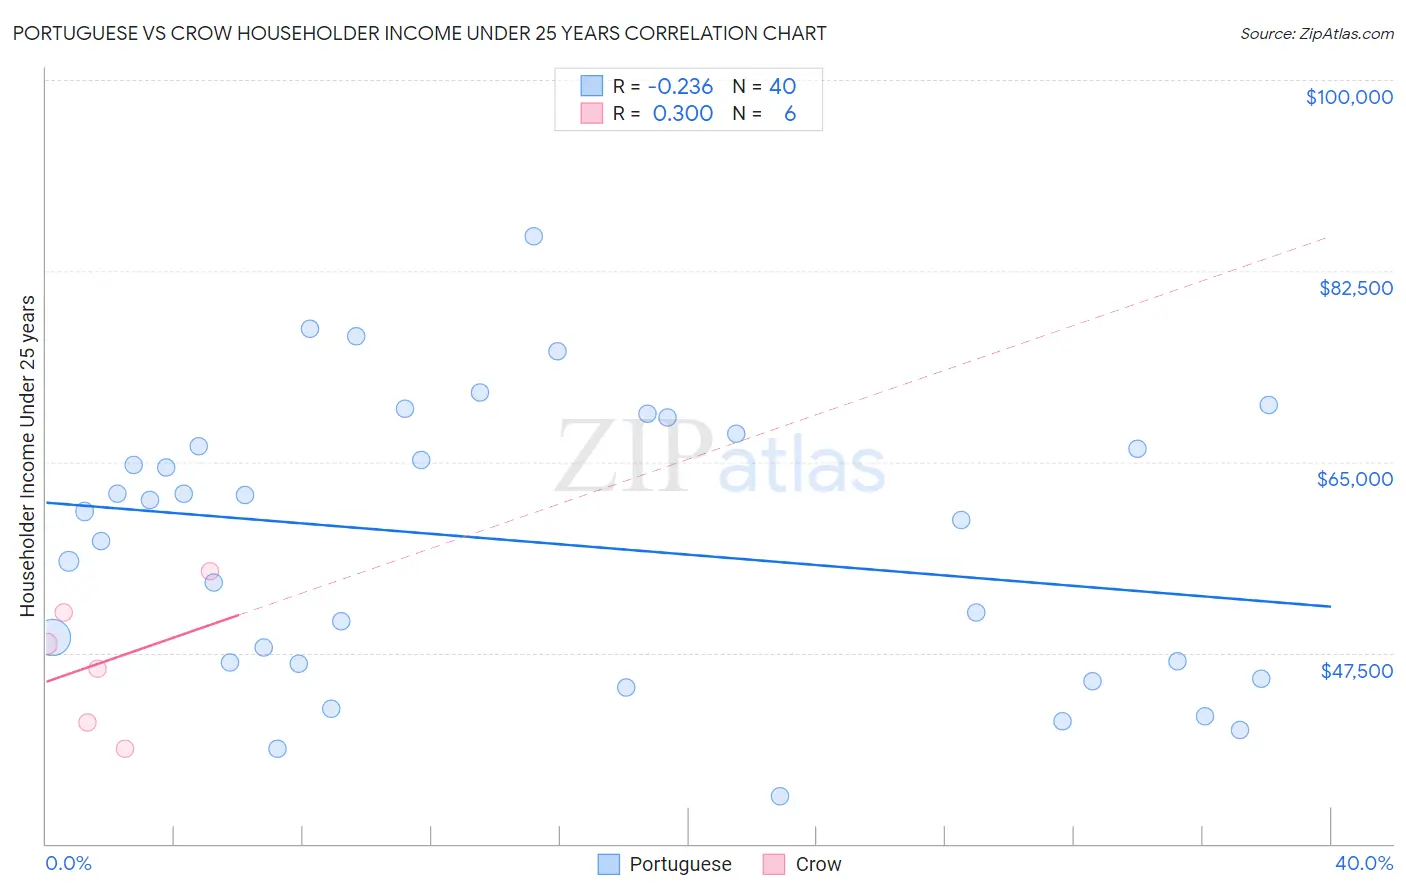 Portuguese vs Crow Householder Income Under 25 years